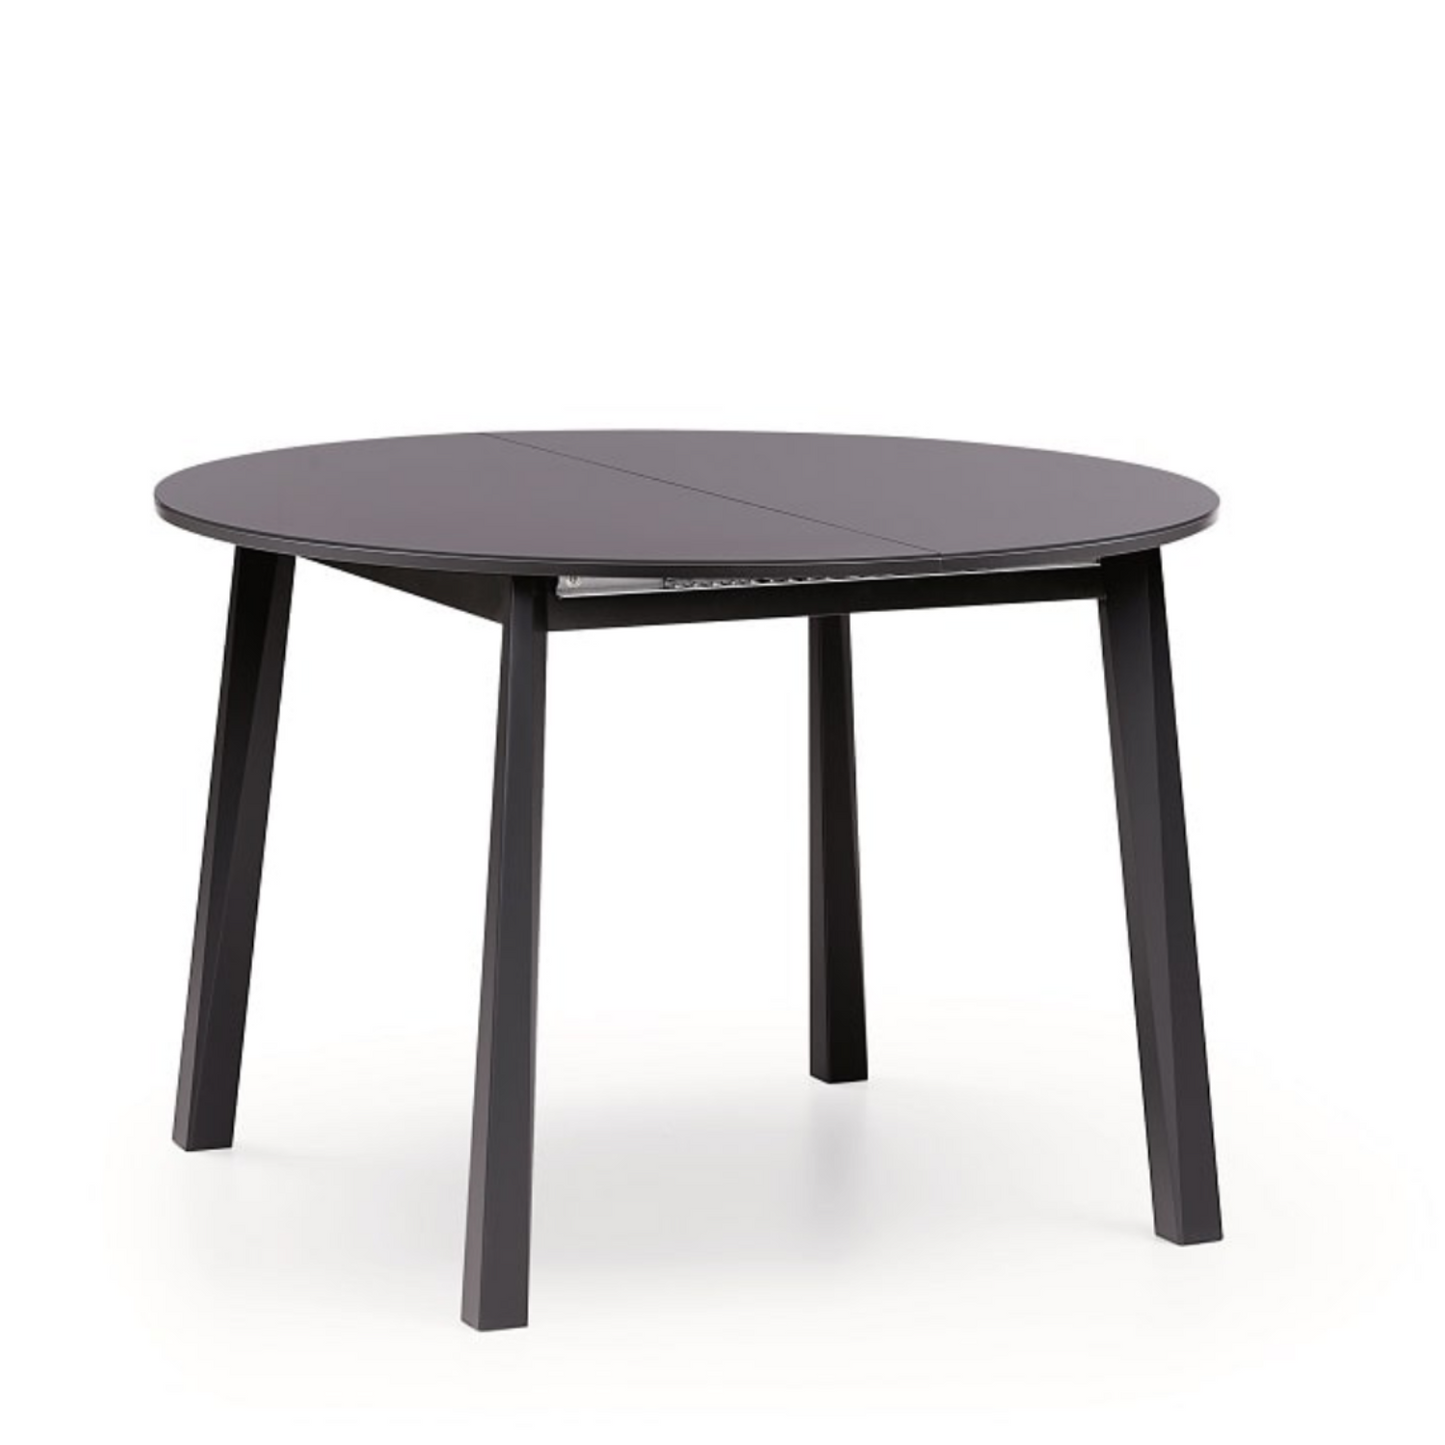 Hydra extendible Round Table by Natisa